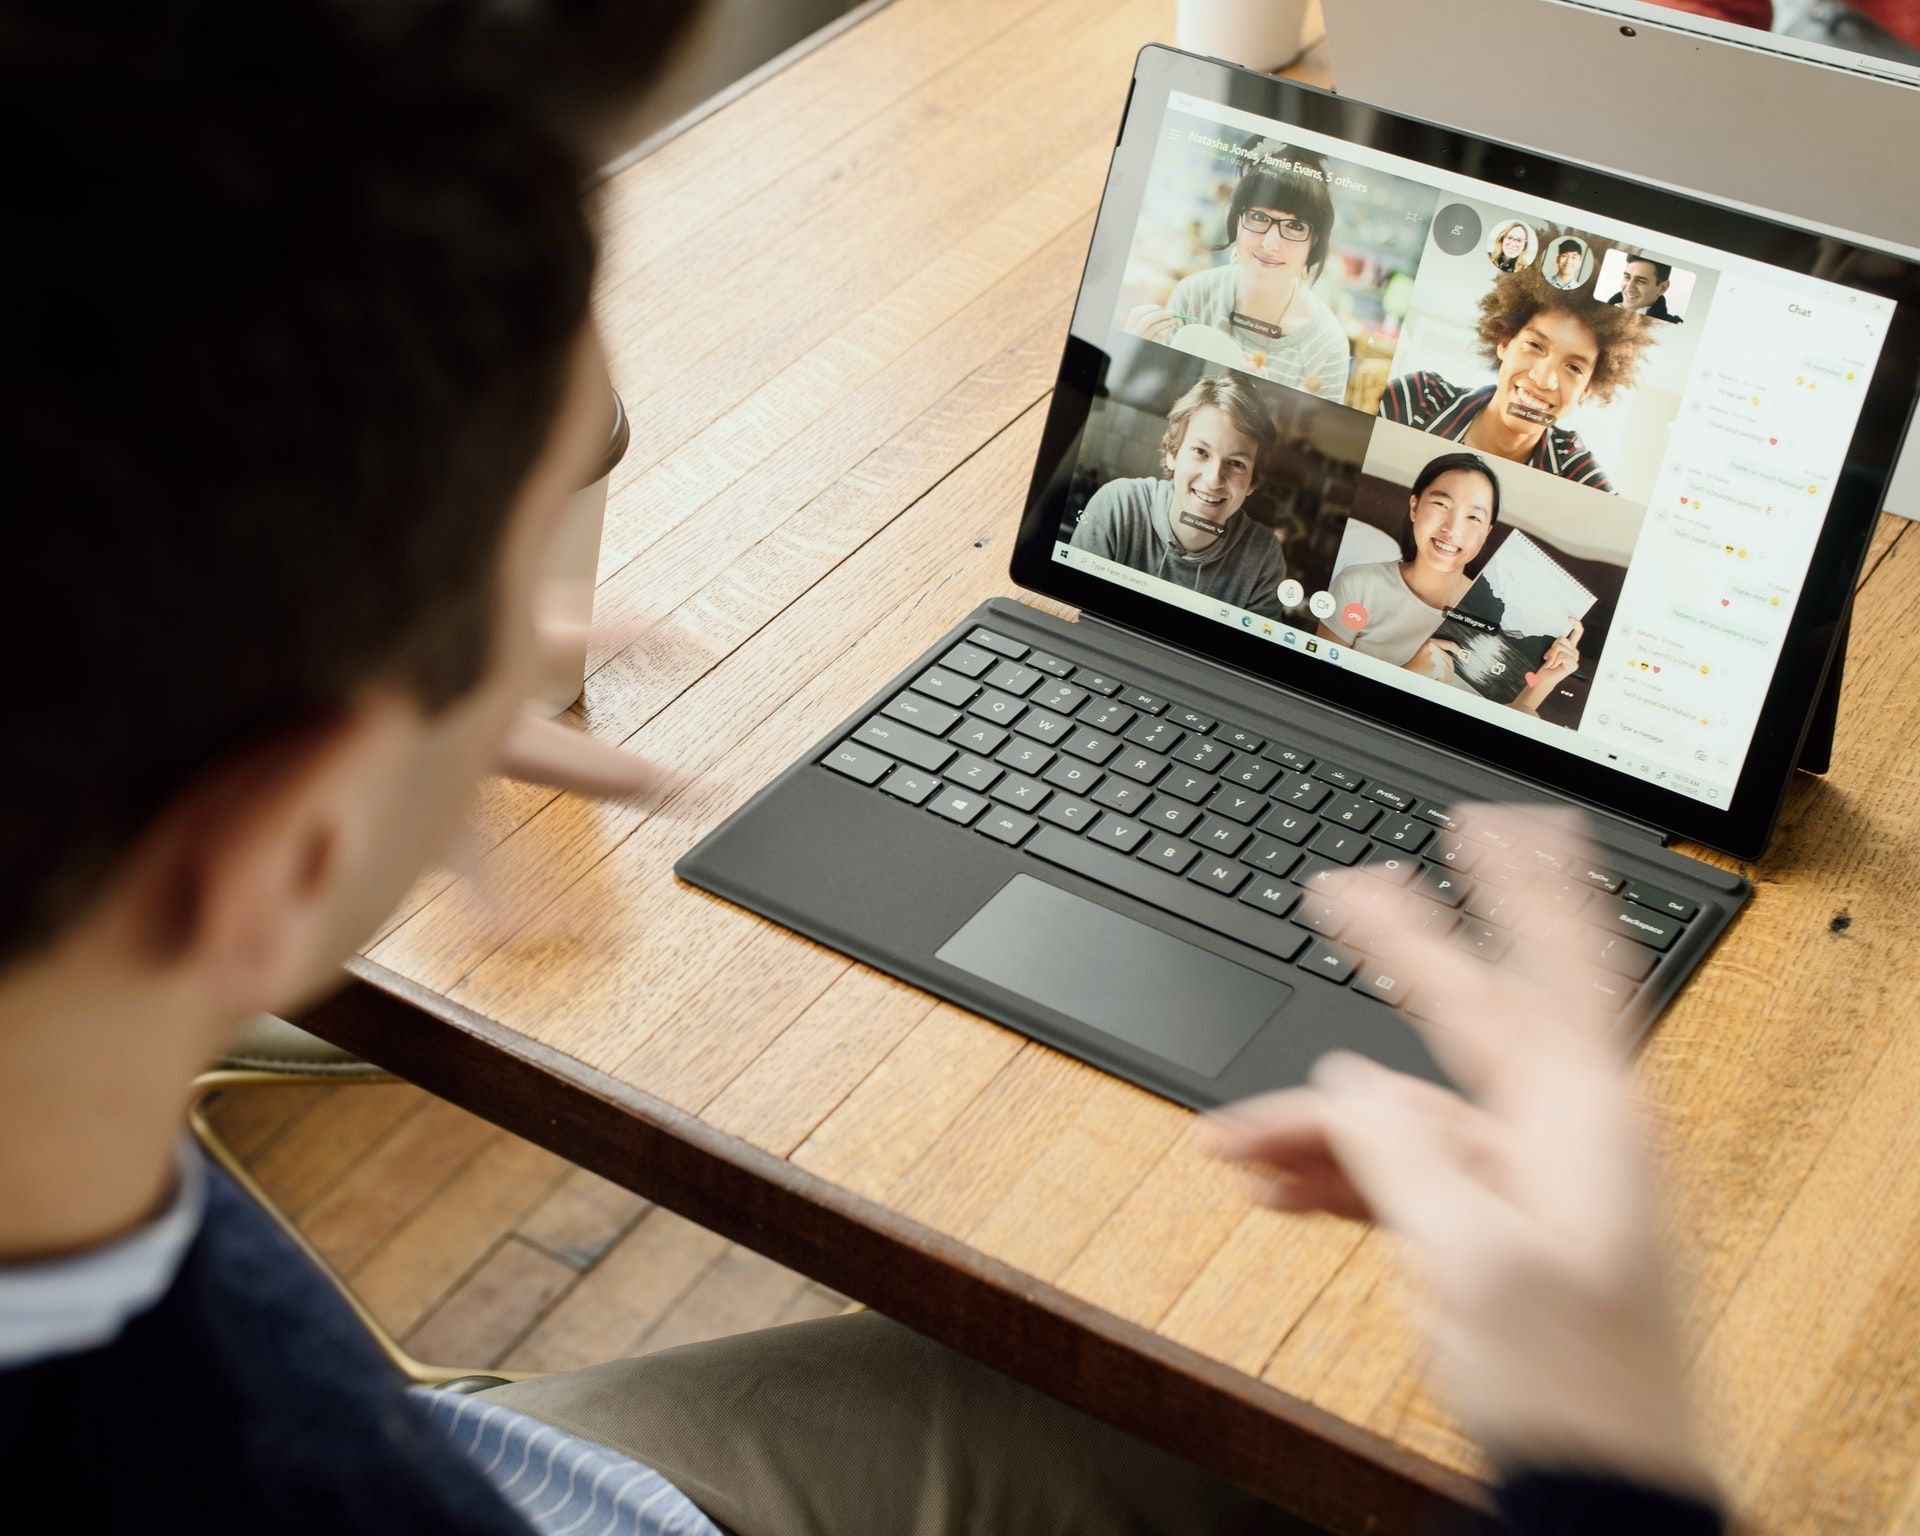 This picture shows a group video call between remote employees taking place.